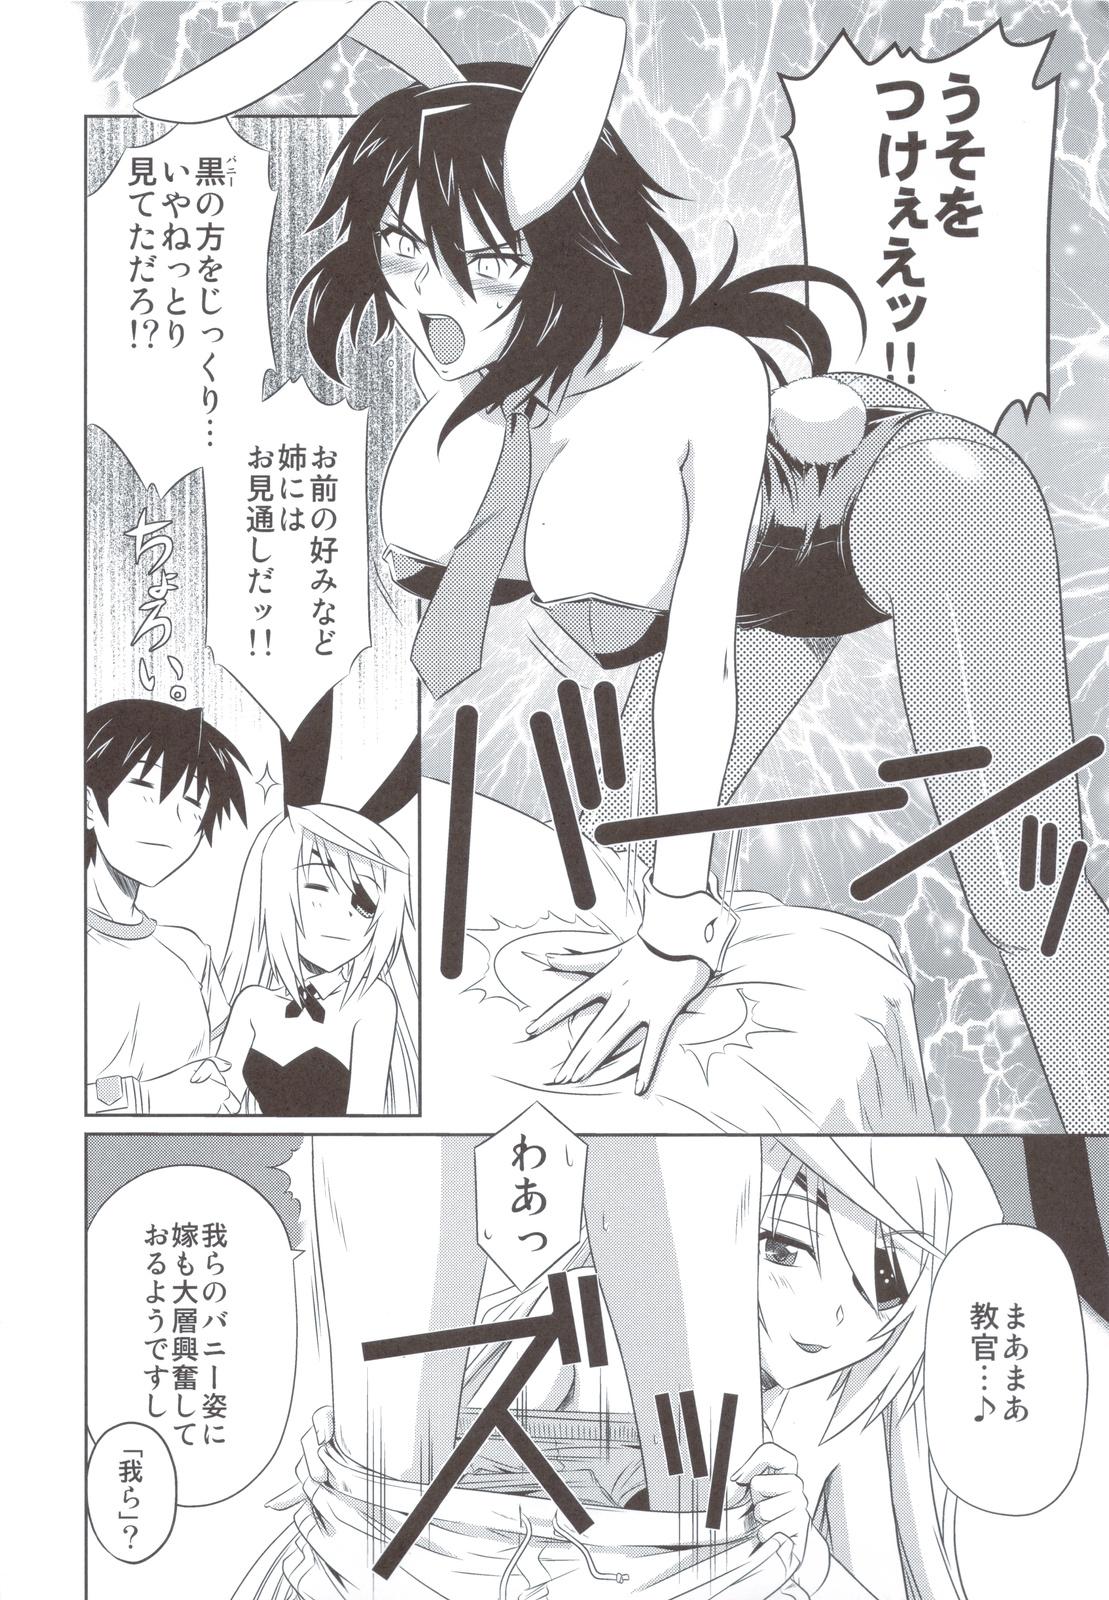 Jap is Incest Strategy 3 - Infinite stratos Cfnm - Page 5